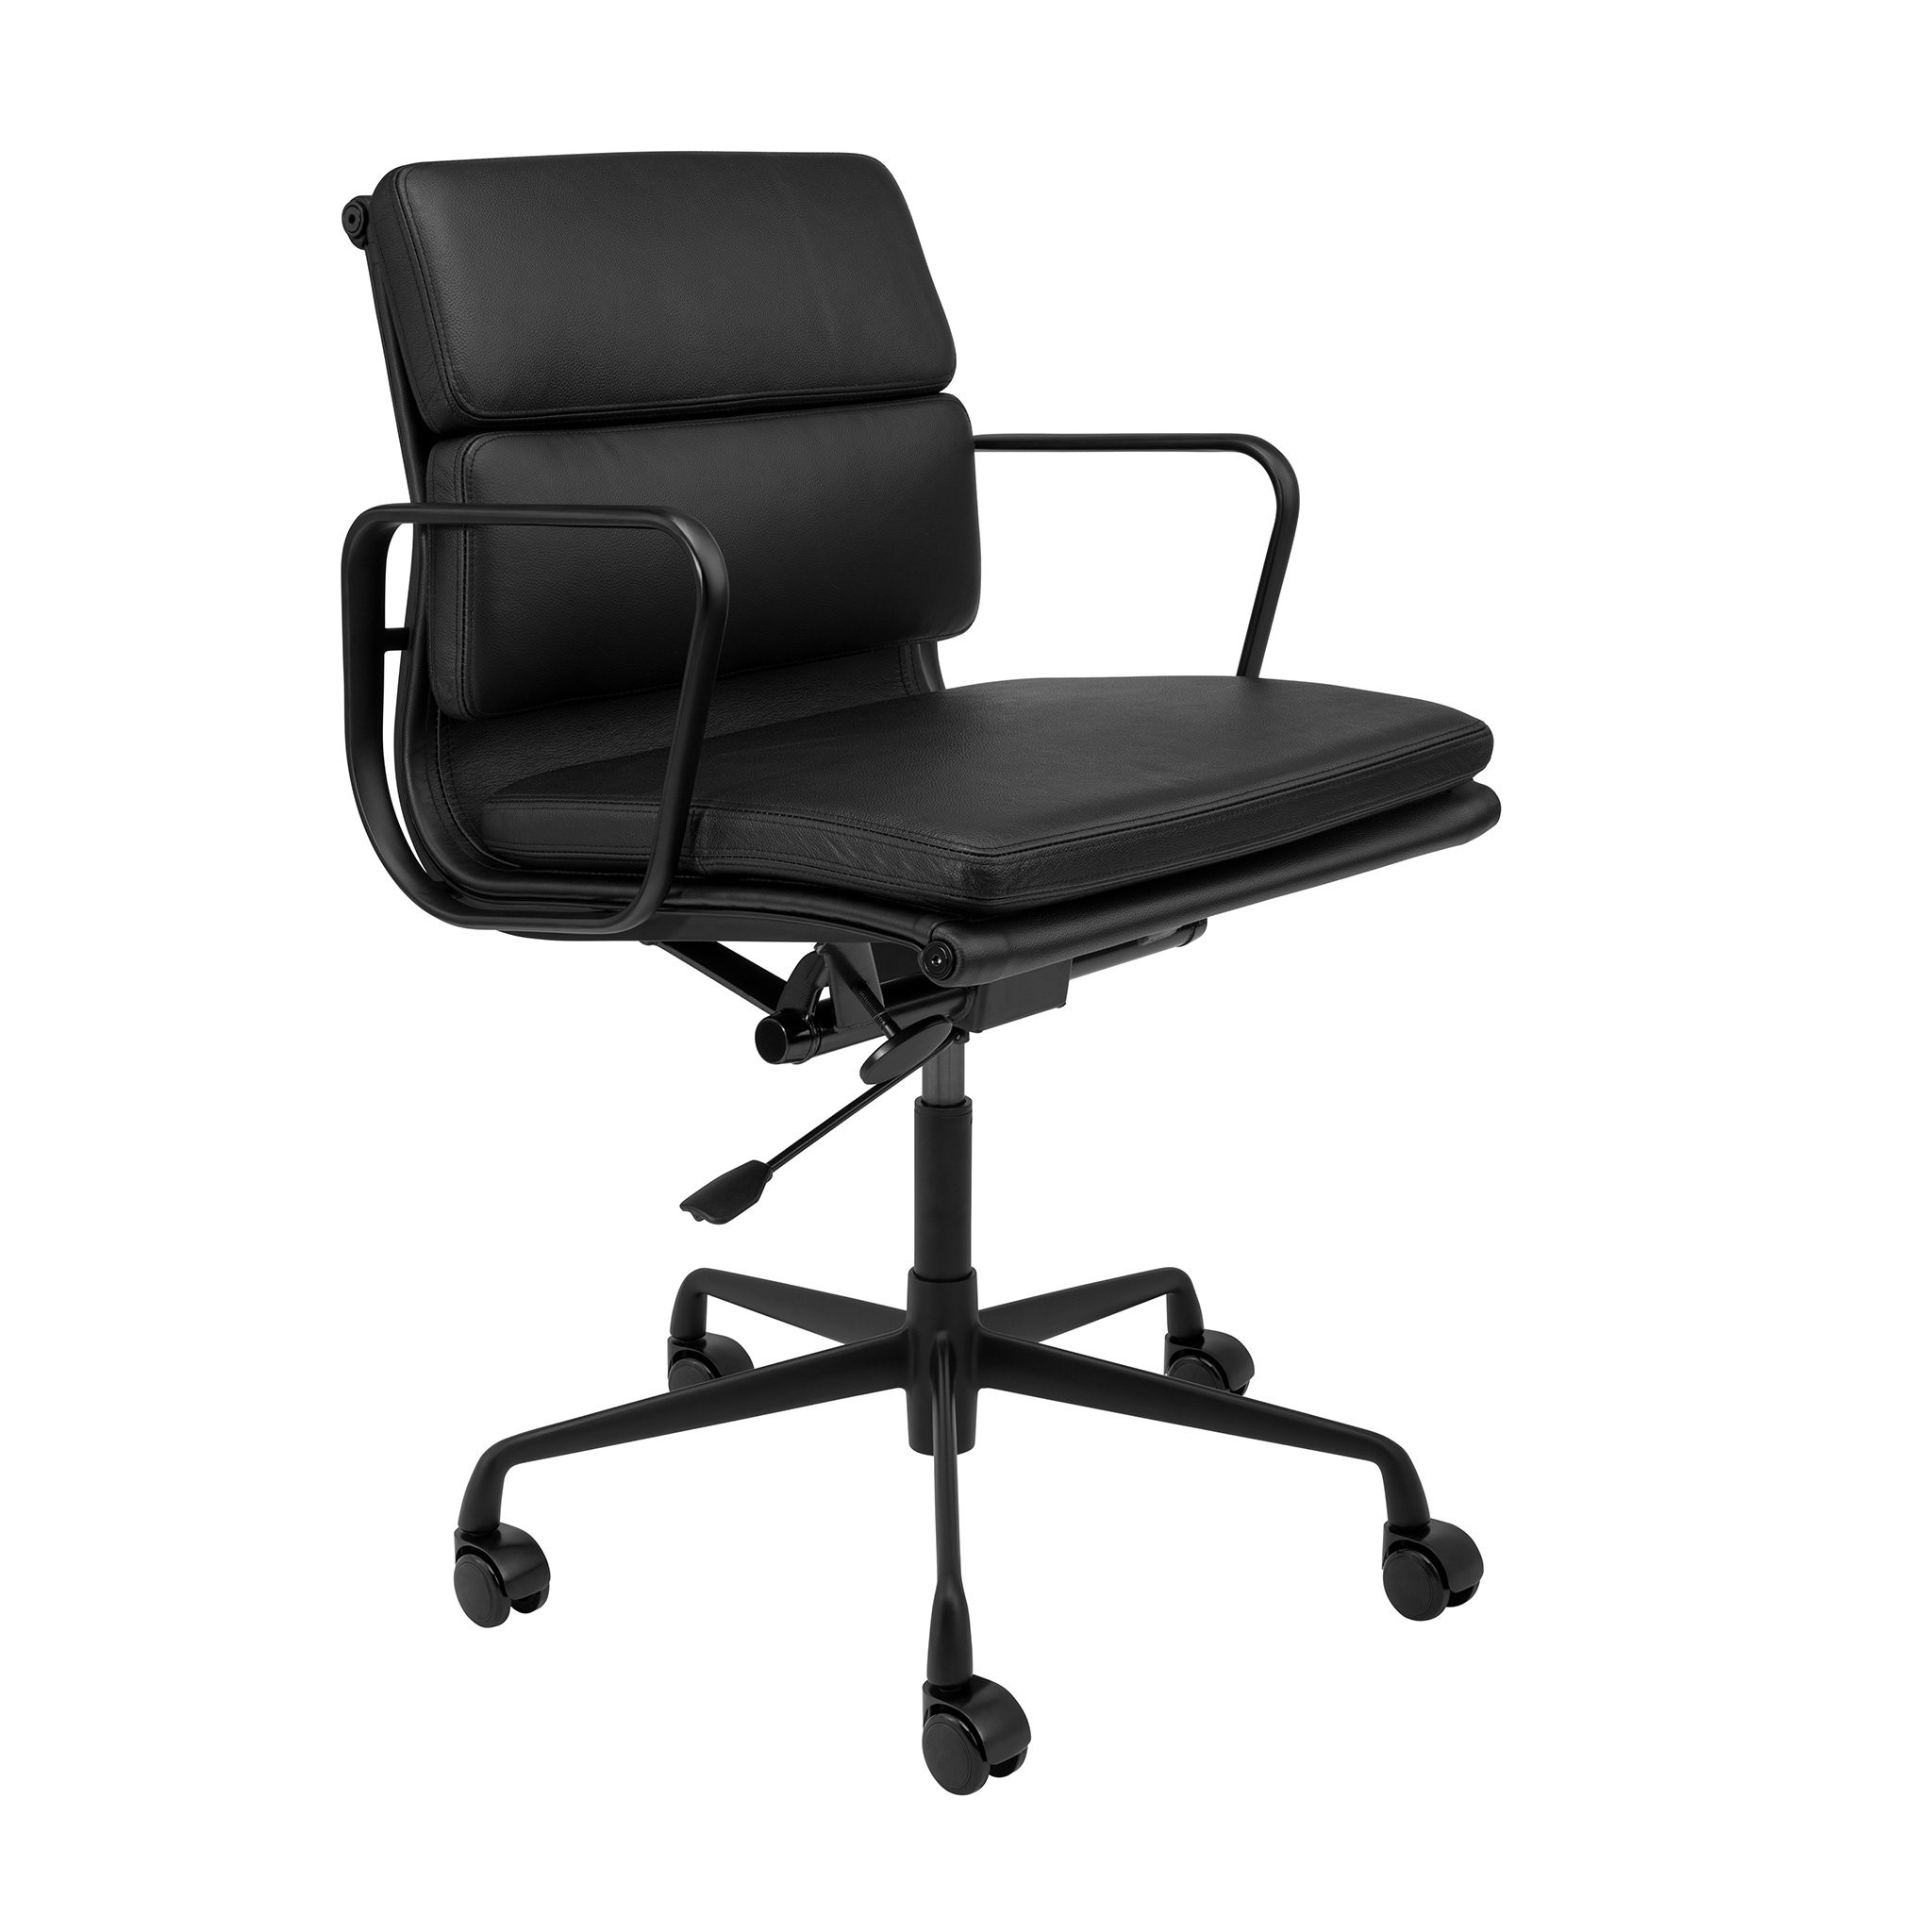 Quality Mid Century Soft Pad Management Chair , Black Powder Coated Modern Leather Office Chair wholesale